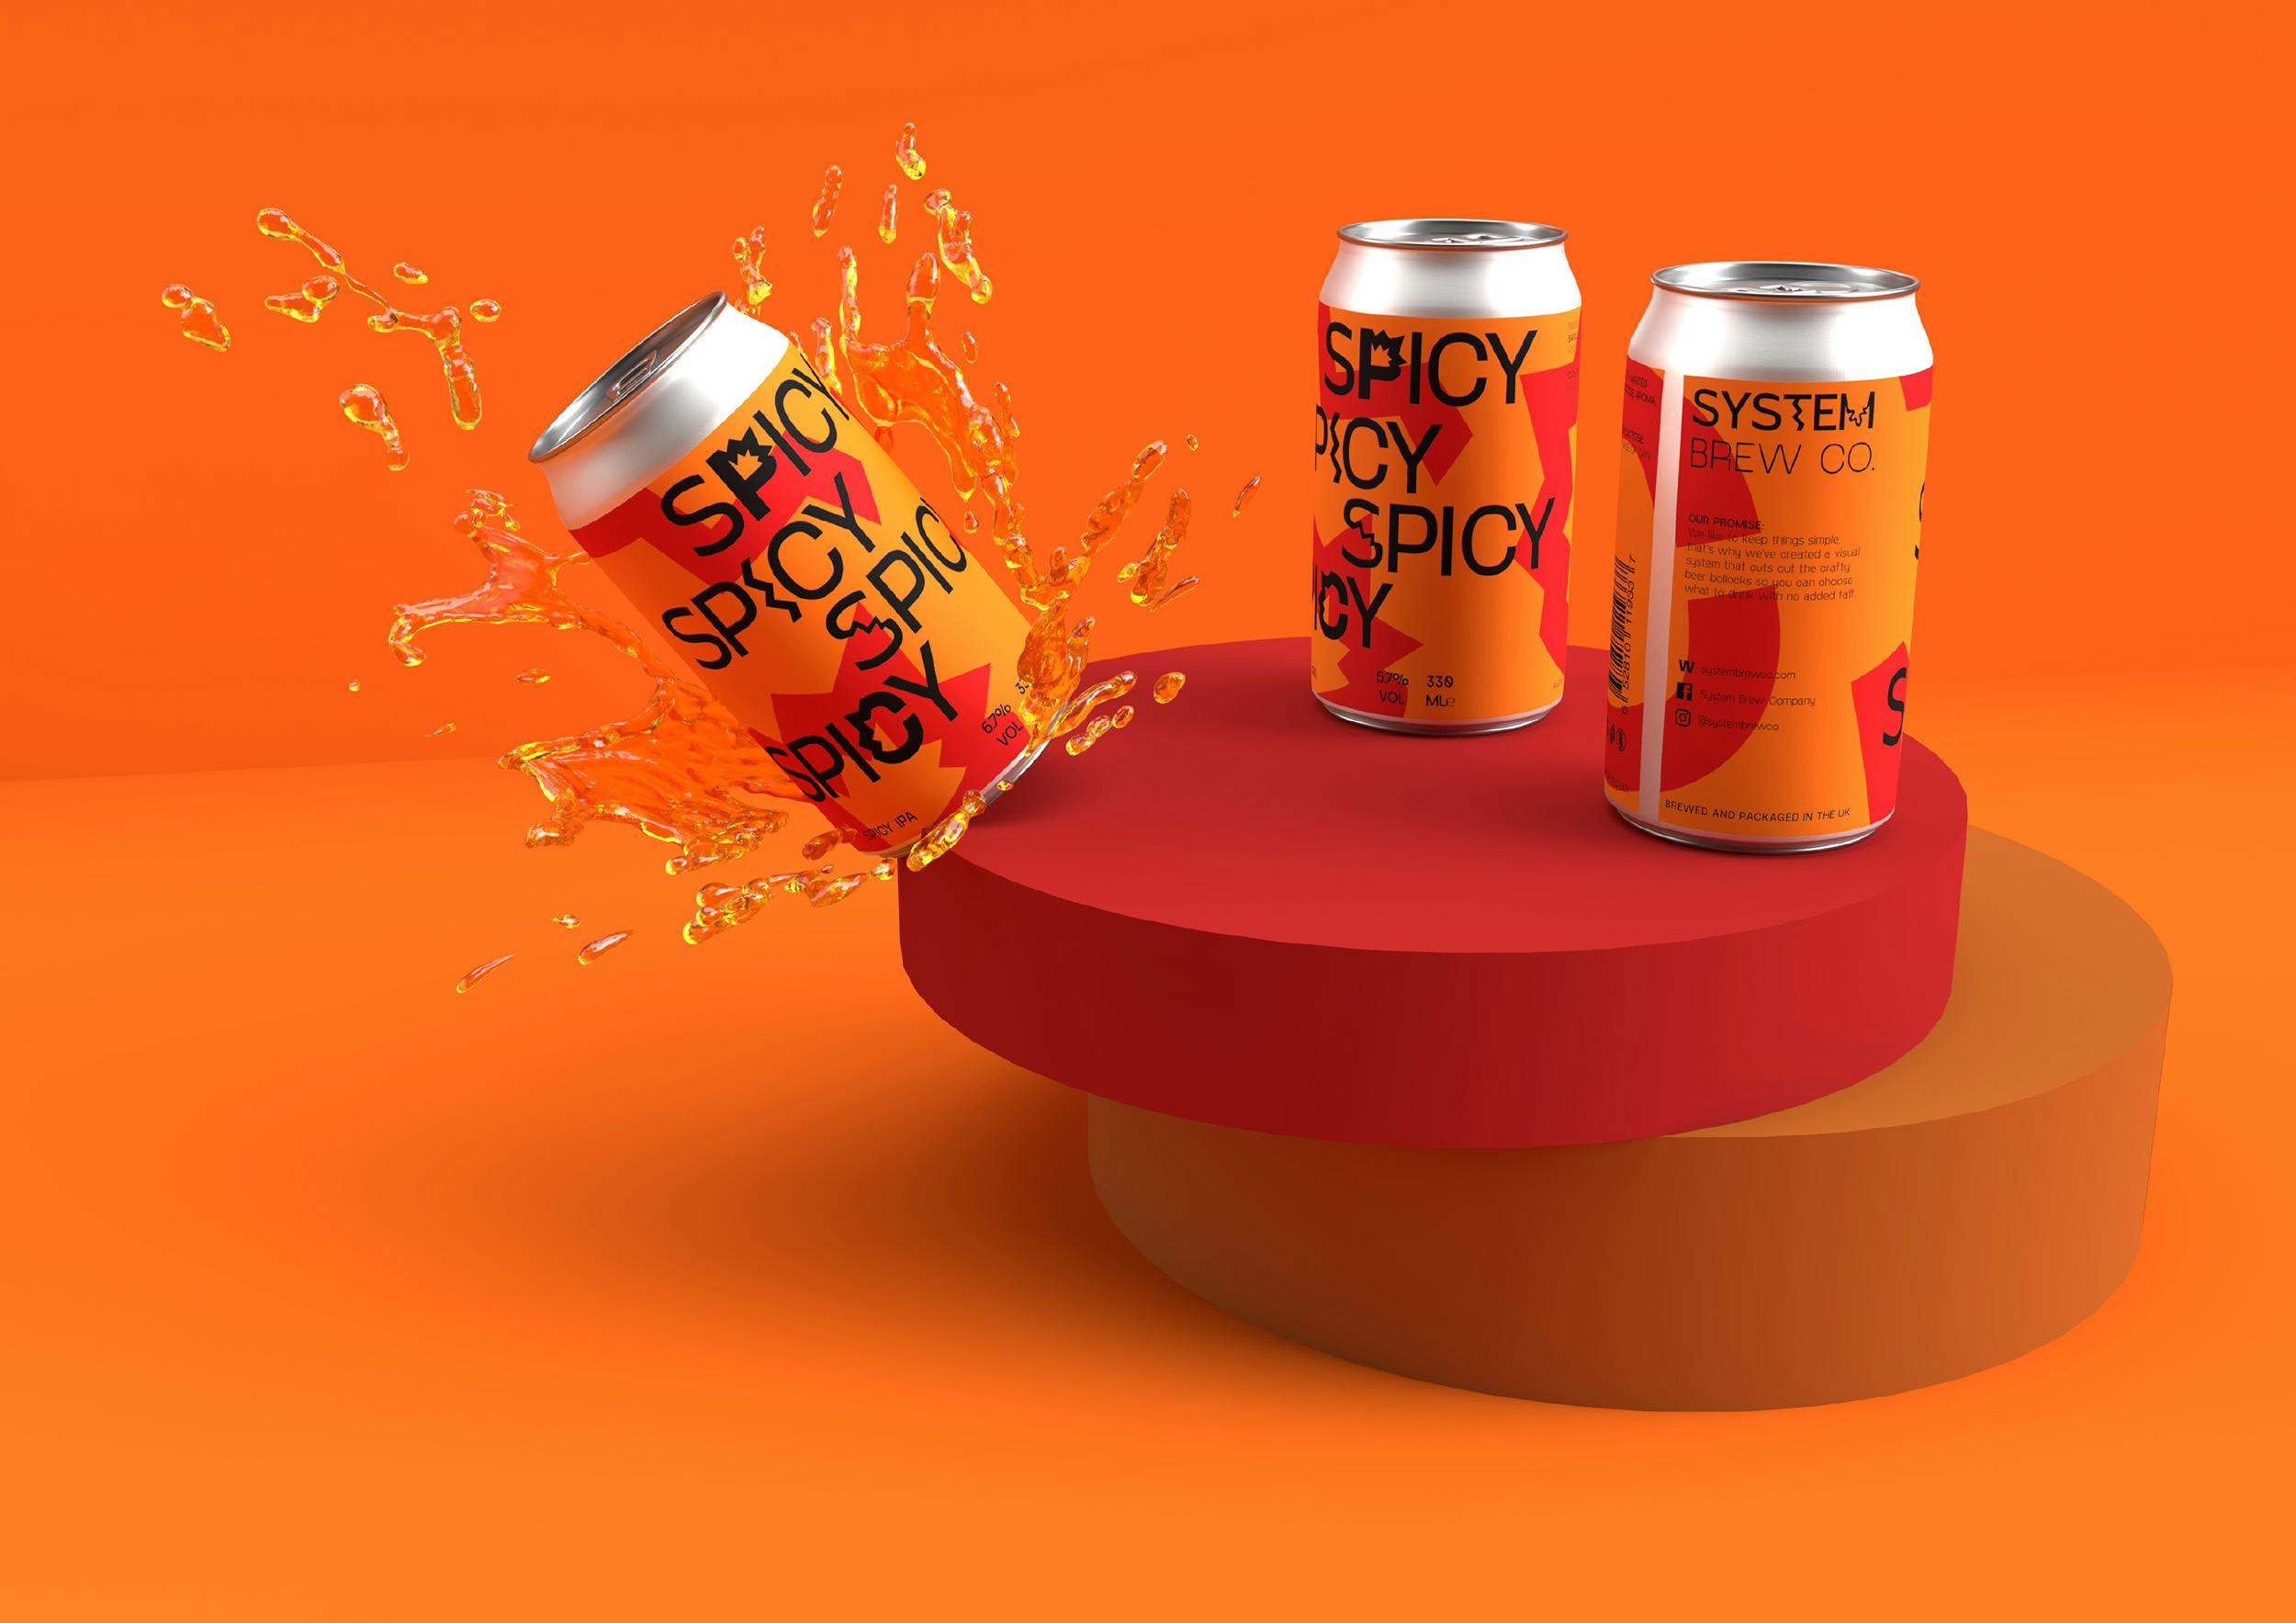 Stylised advert for for an orange canned drink called 'Spicy'